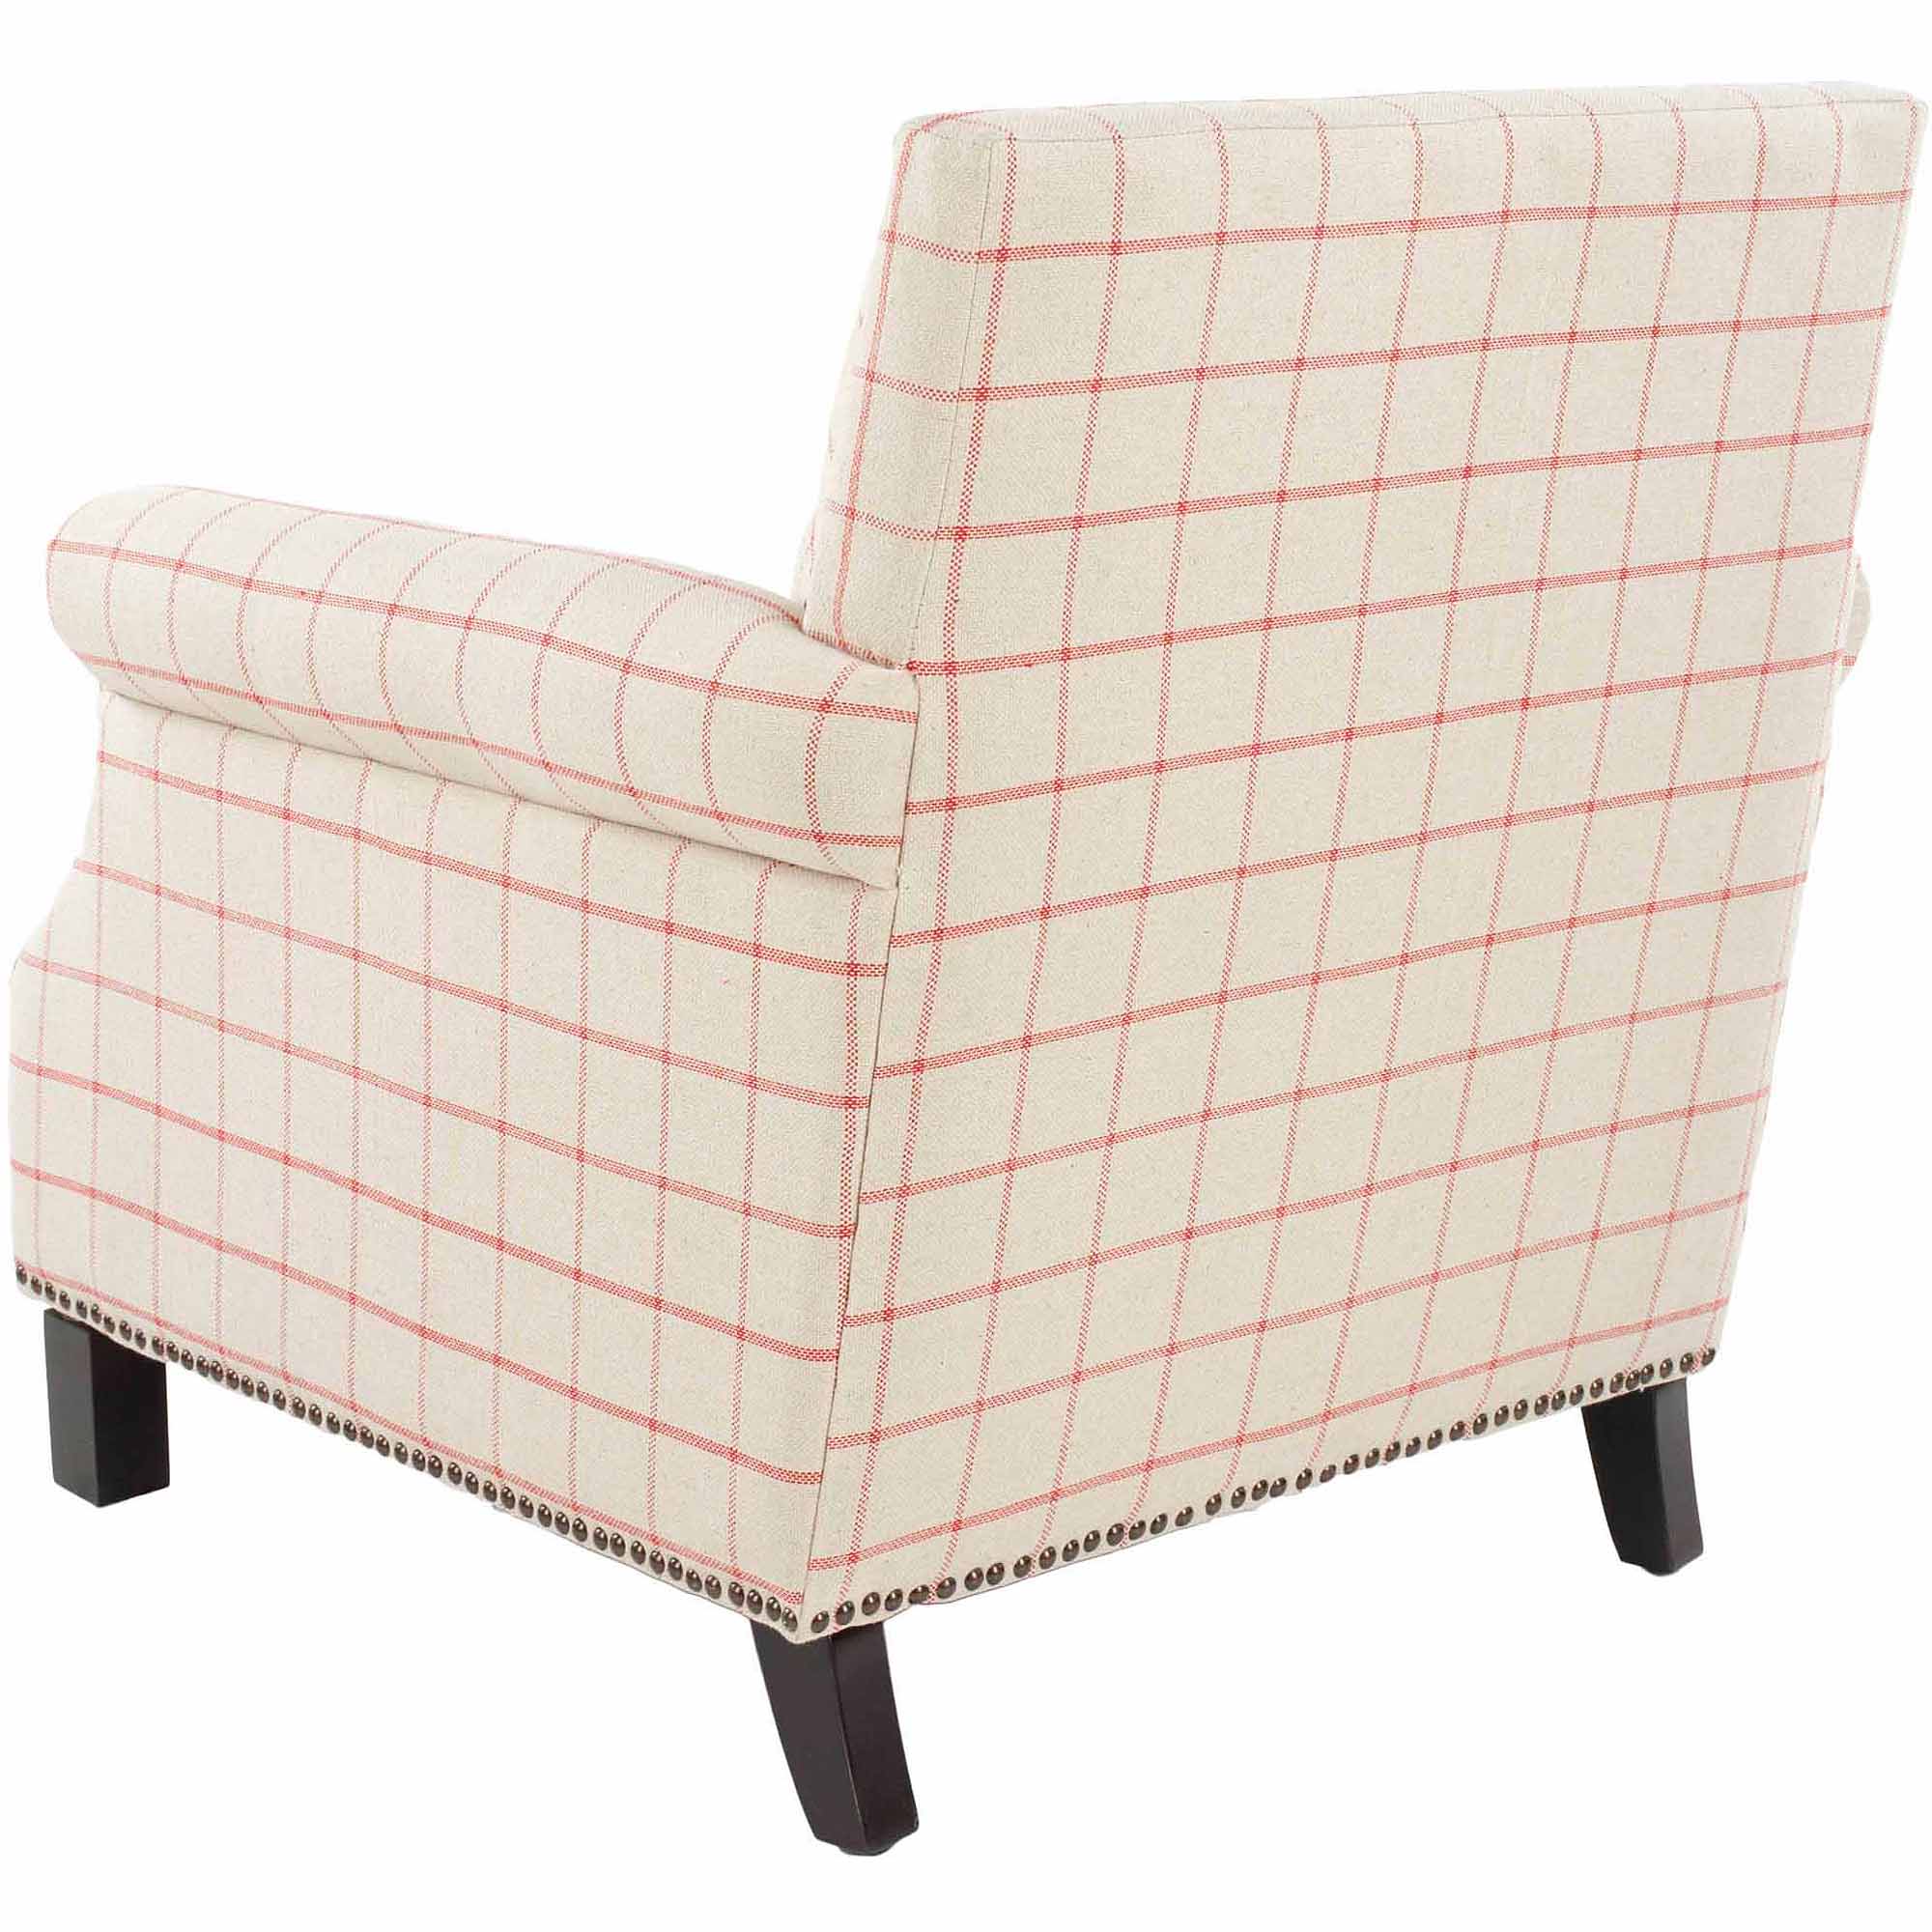 SAFAVIEH Easton Rustic Glam Upholstered Club Chair w/ Nailheads, Taupe/Orange - image 4 of 4